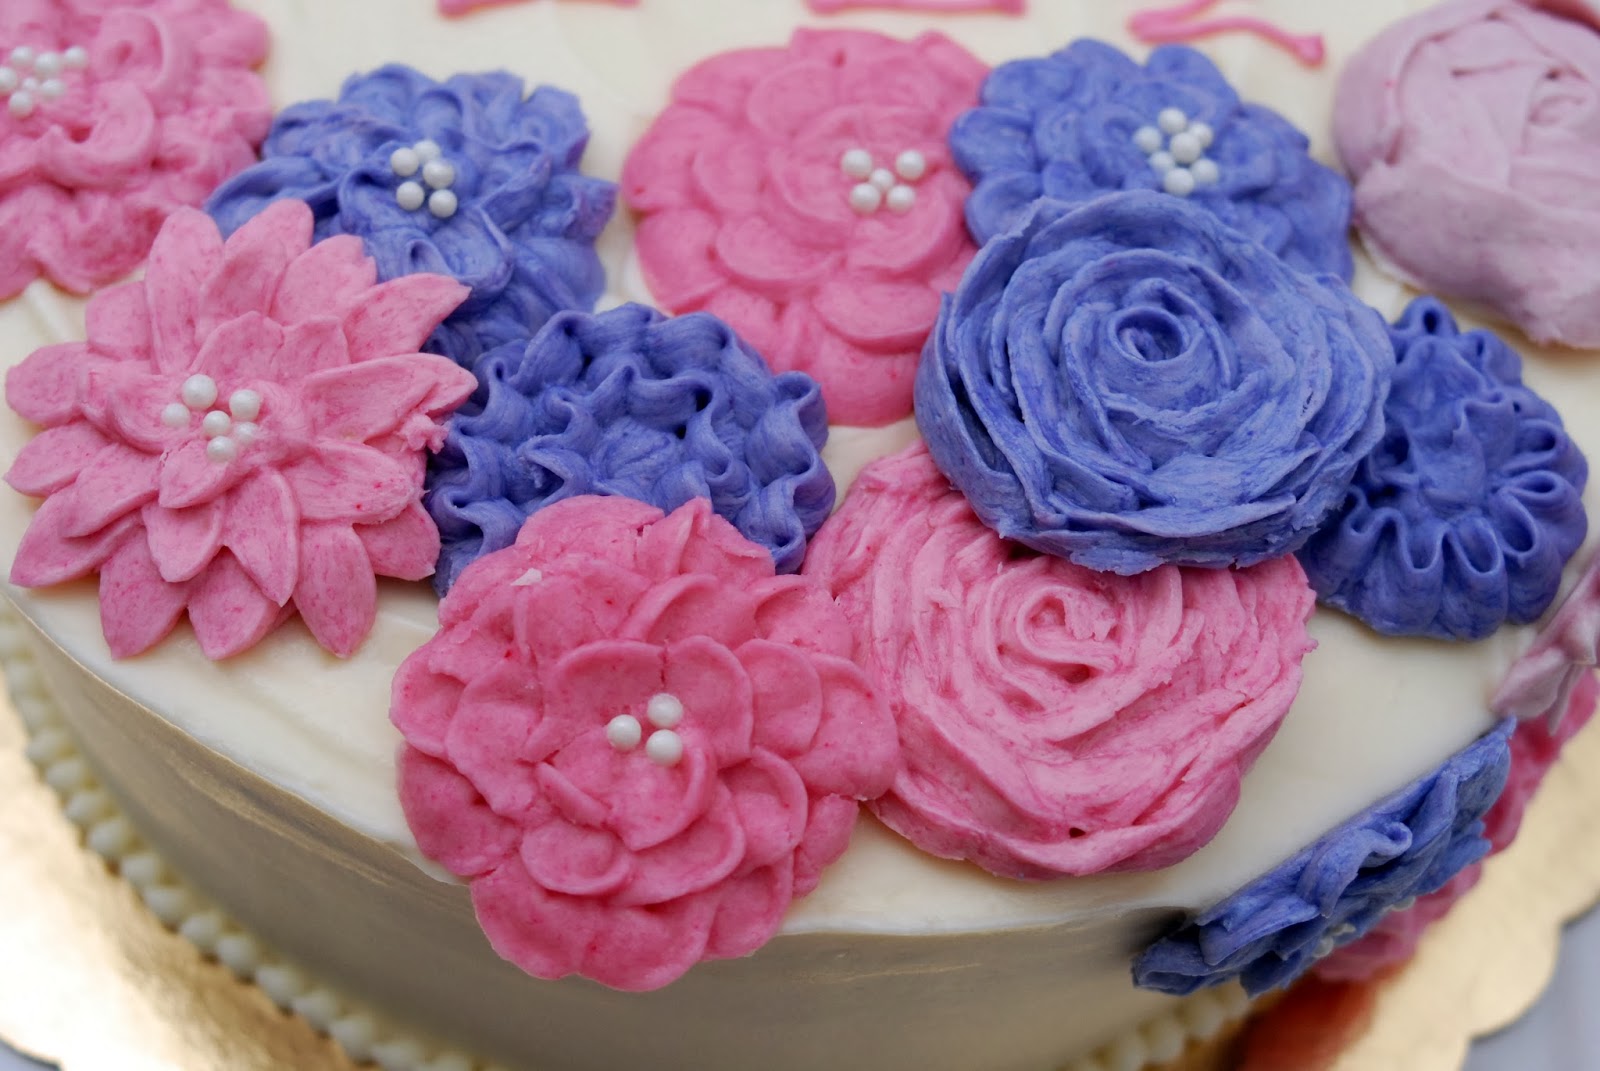 make out decided try the purple flowers how flowers flowers and  to so i  buttercream to buttercream